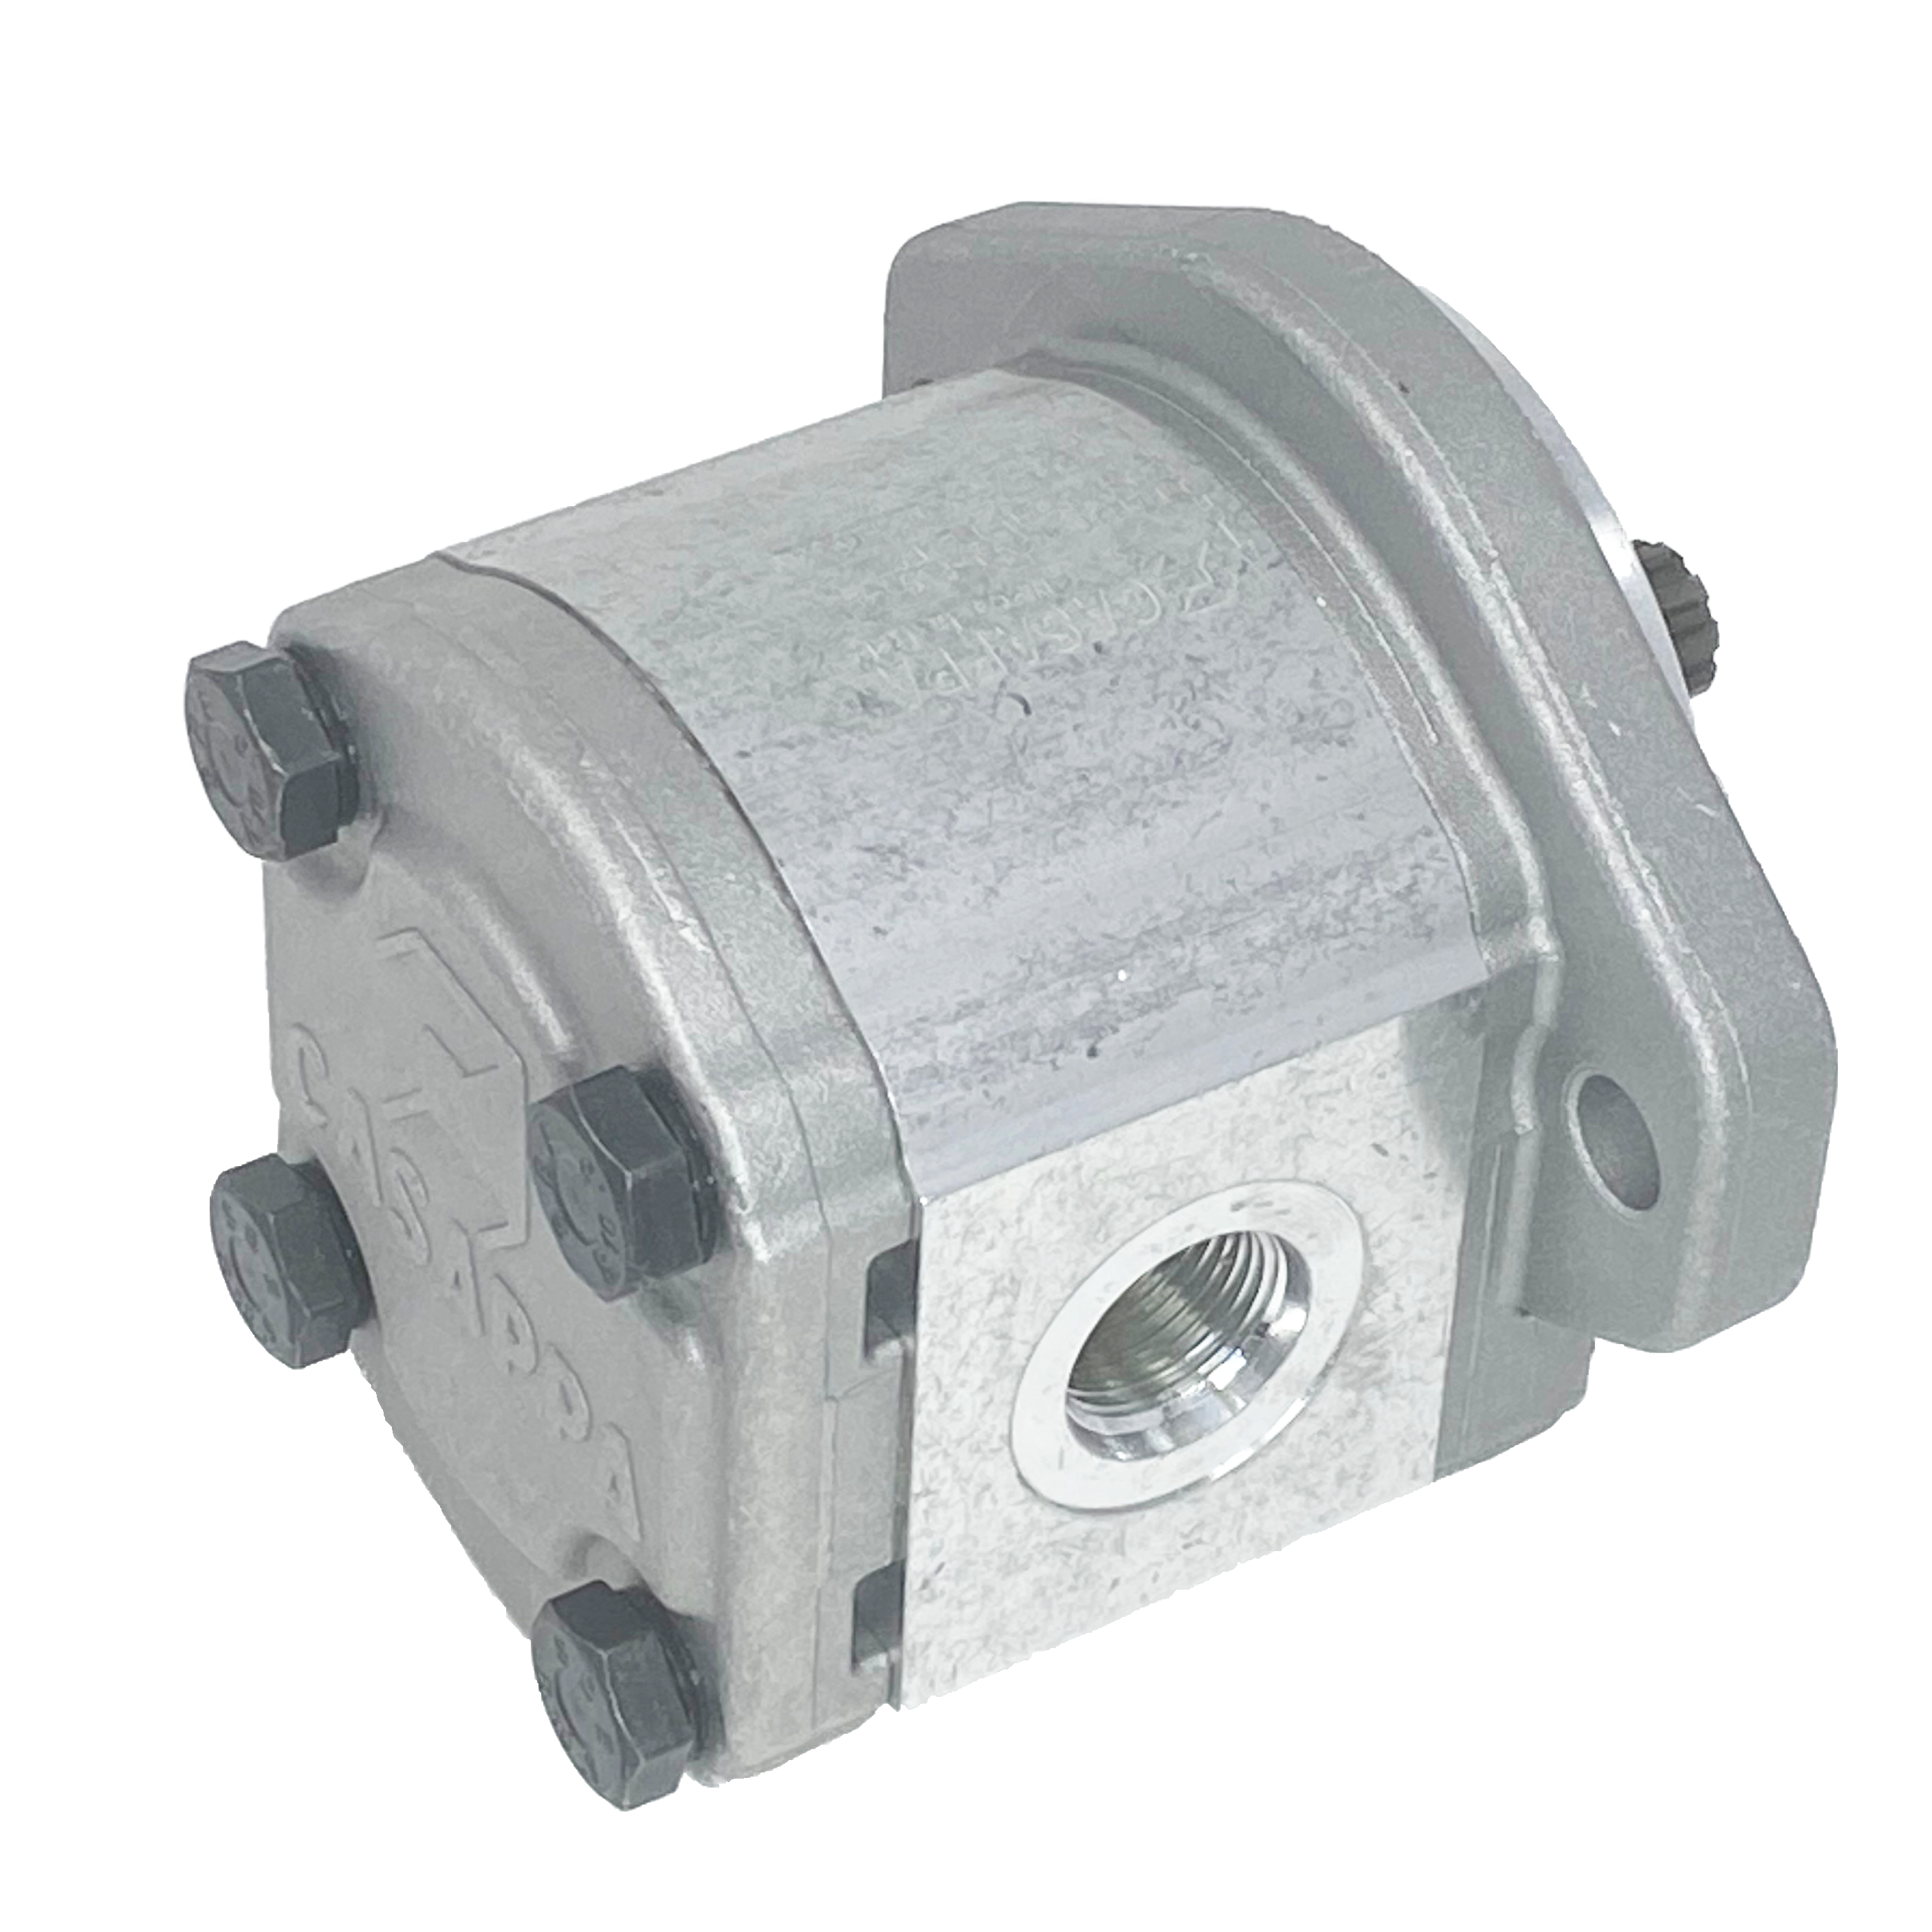 PLP20.16S0-49S1-LOF/OC-S7-N-EL-FS : Casappa Polaris Gear Pump, 16.85cc, 3625psi Rated, 3000RPM, CCW, 5/8" Keyed Shaft, SAE A 2-Bolt Flange, 1" #16 SAE Inlet, 0.625 (5/8") #10 SAE Outlet, Aluminum Body & Flange